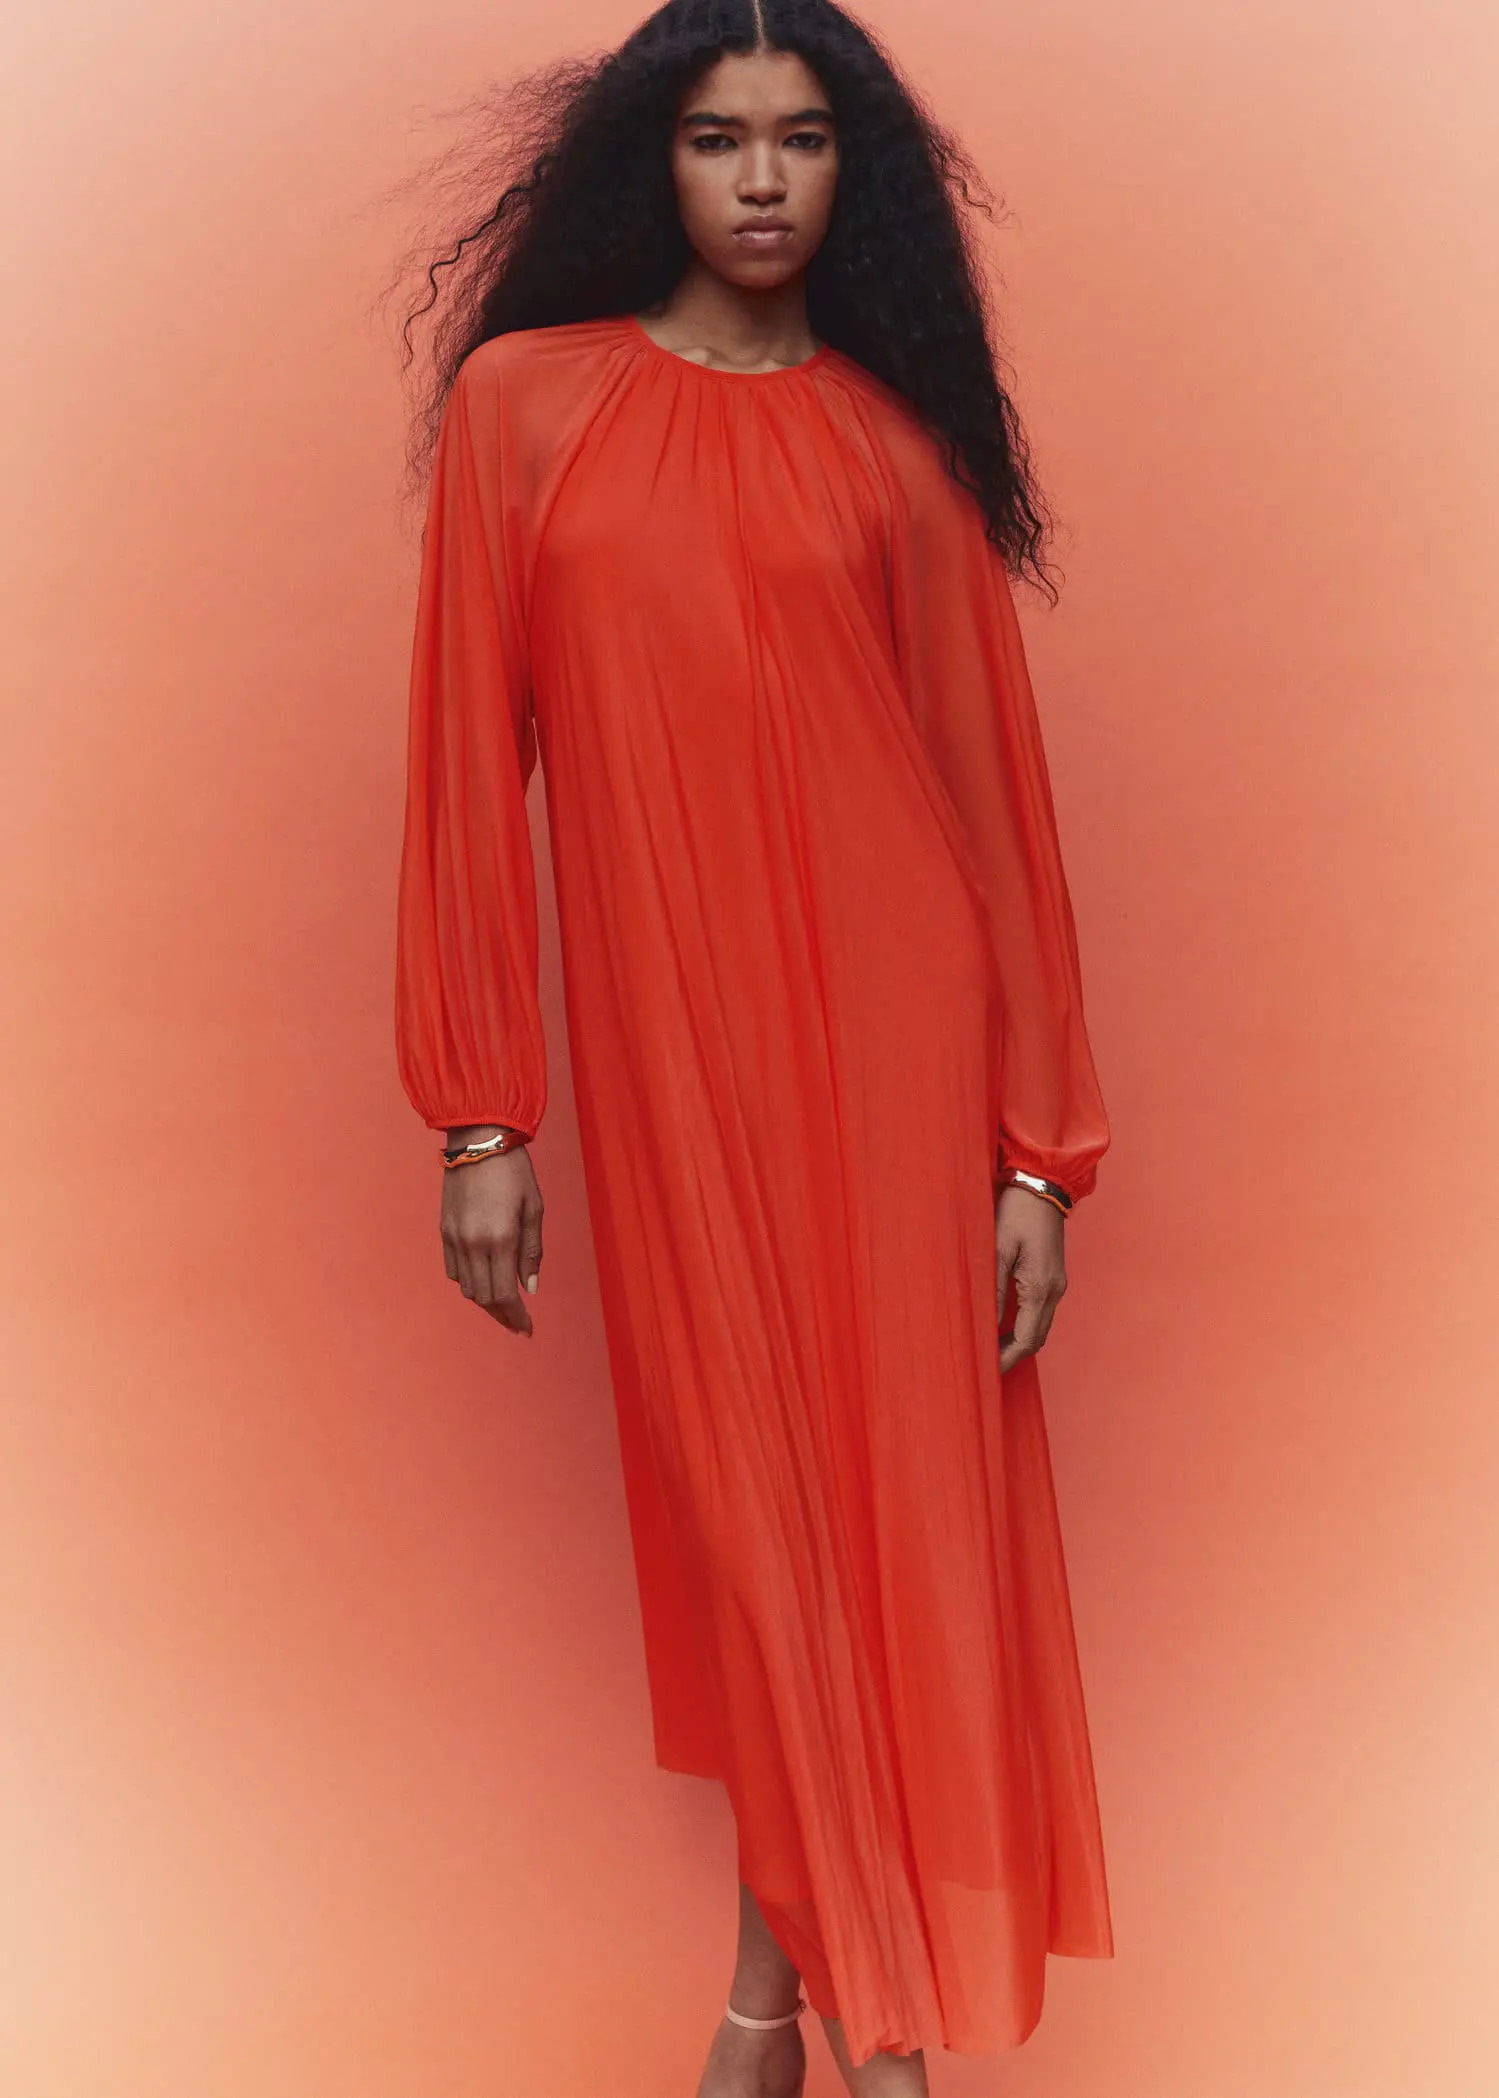 Mango Puffed sleeves dress. a woman in a red dress standing in front of a pink background. 